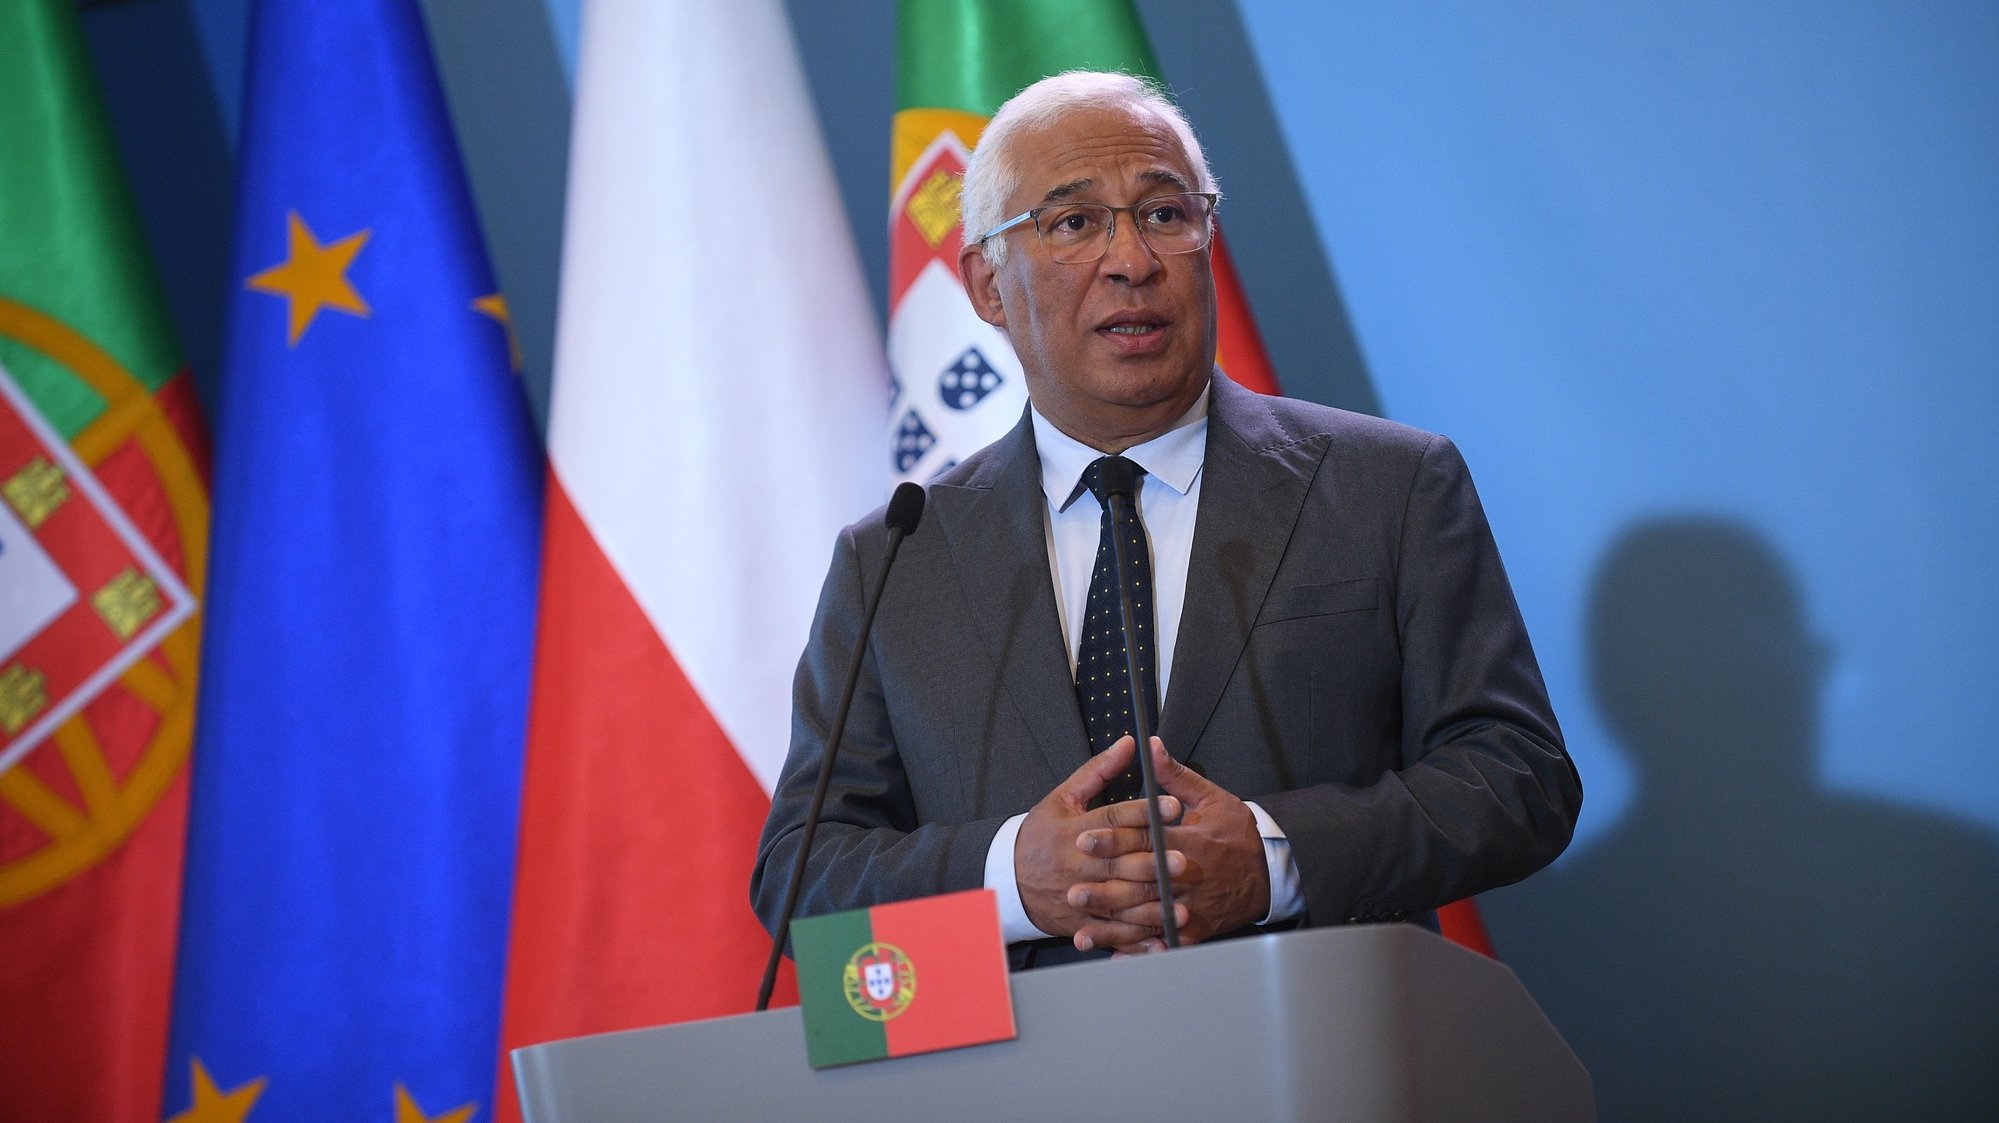 epa09959690 Portuguese Prime Minister Antonio Costa attends a joint press conference with his Polish counterpart (not pictured) following their meeting at the Chancellery of the Prime Minister in Warsaw, Poland, 20 May 2022.  EPA/Marcin Obara POLAND OUT